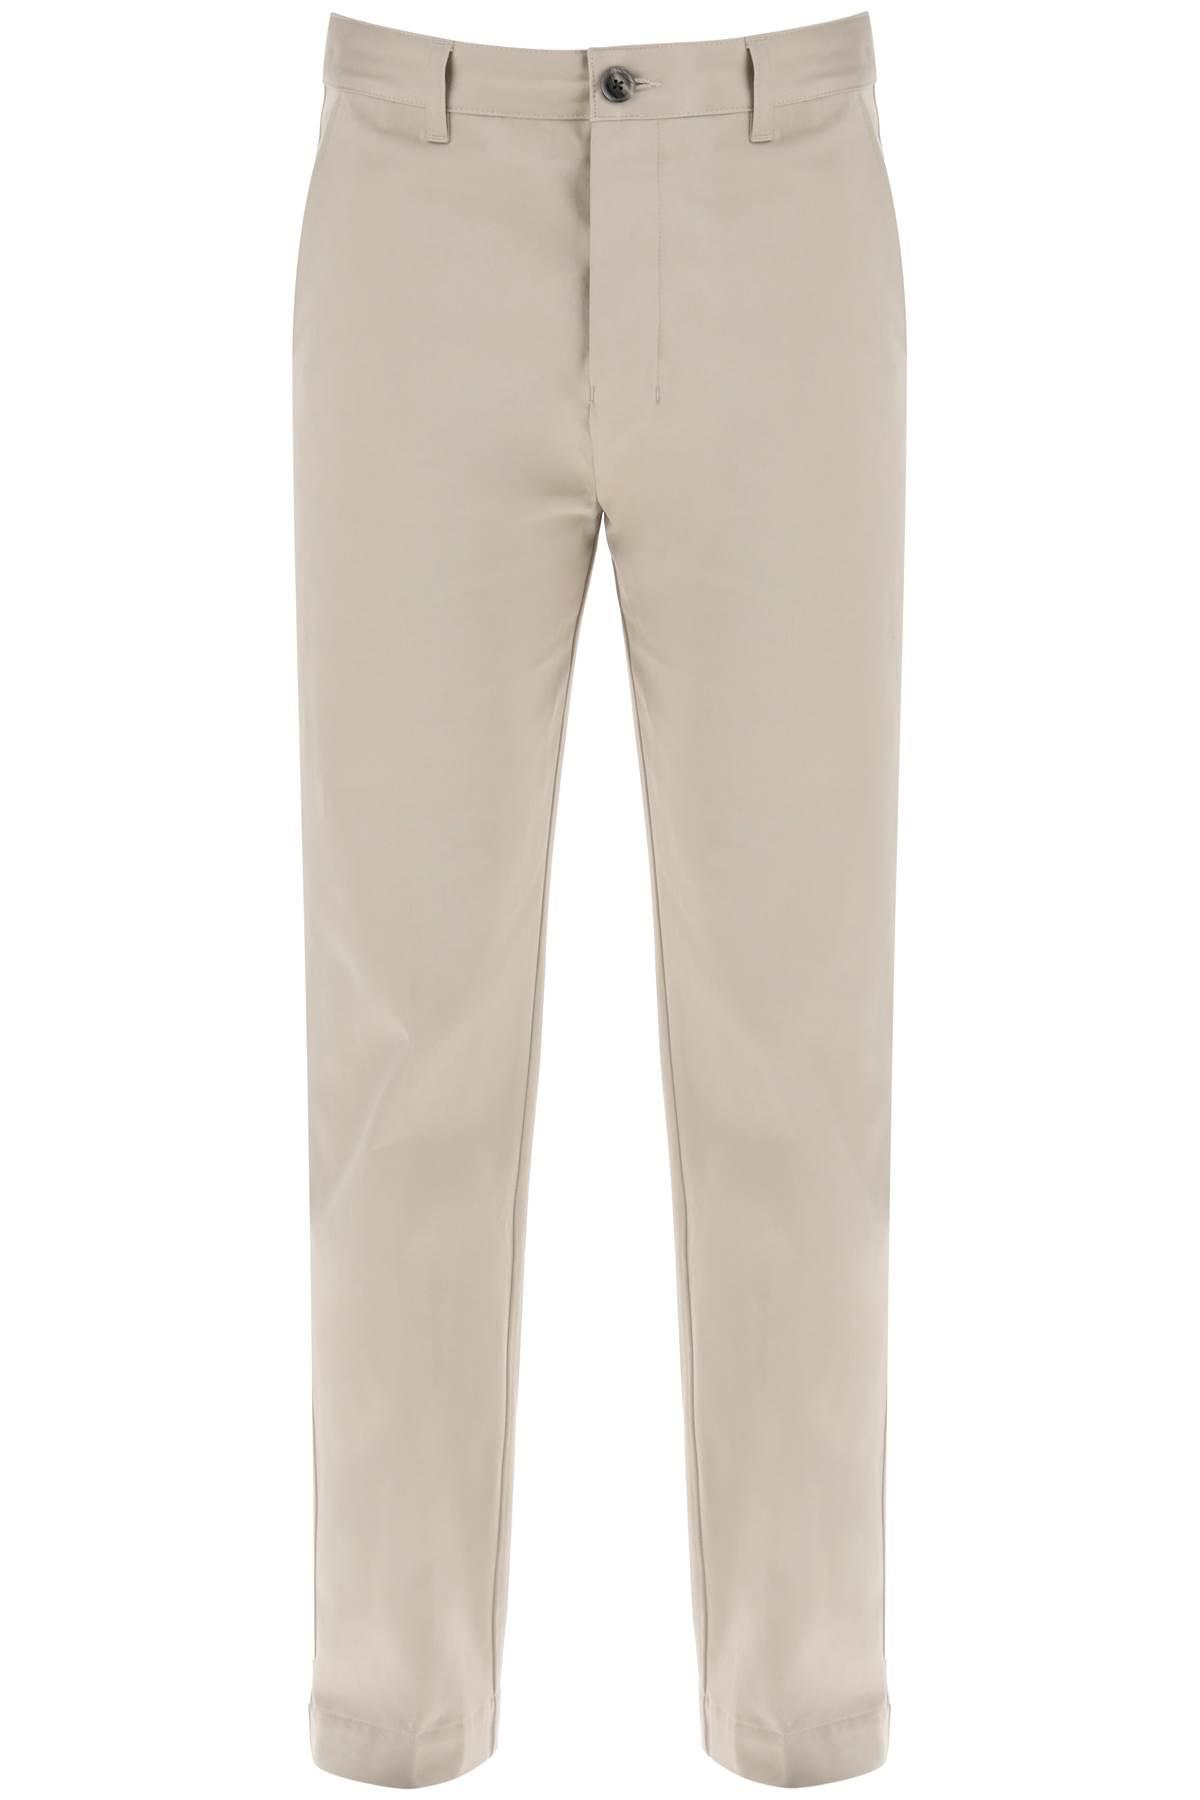 AMI ALEXANDRE MATTIUSSI AMI ALEXANDRE MATTIUSSI Cotton satin chino pants in